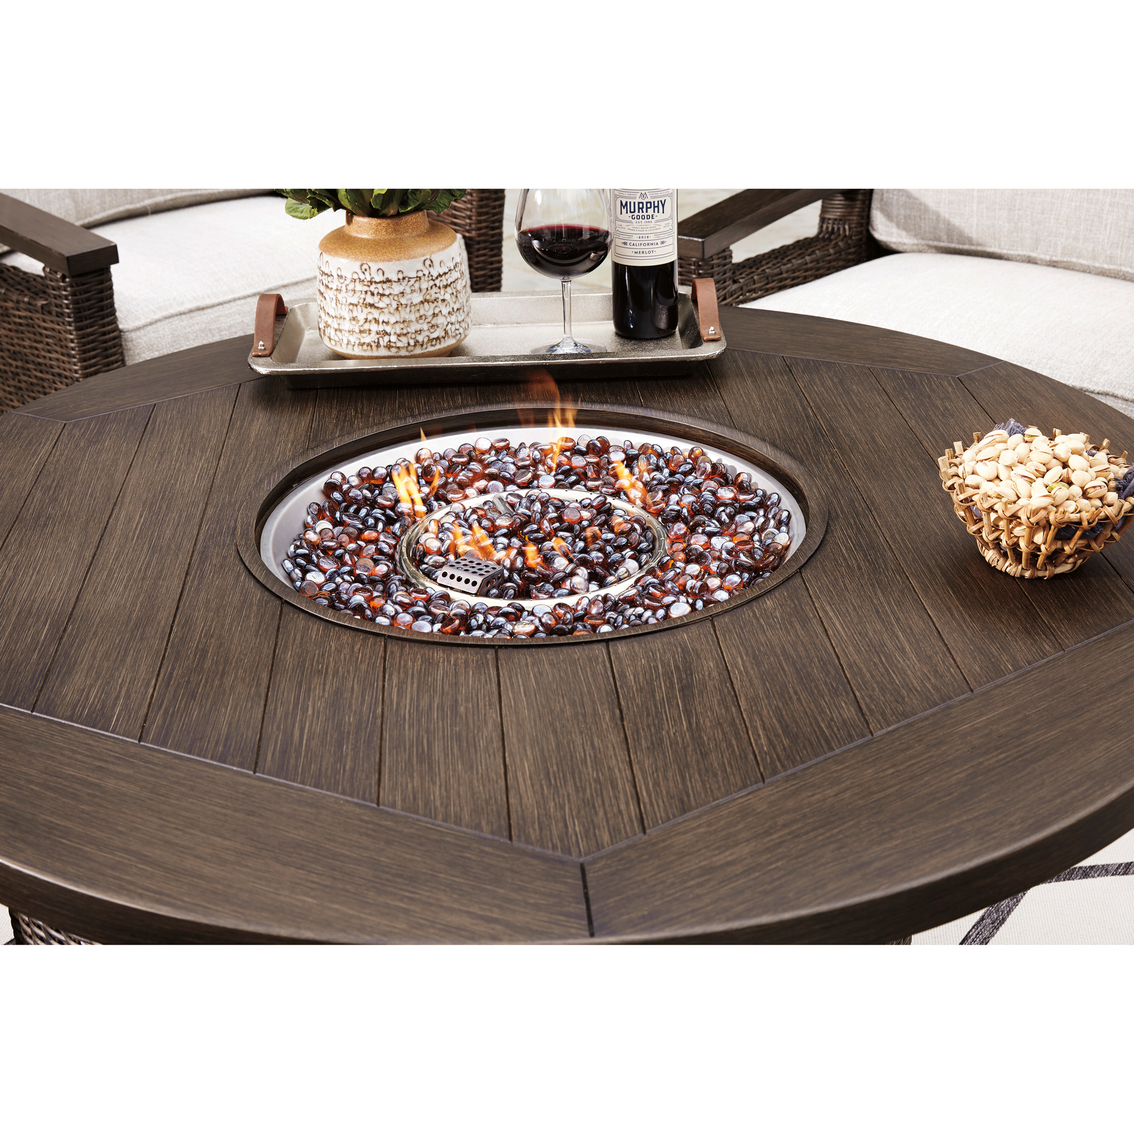 Signature Design by Ashley Paradise Trail Fire Pit Table with 4 Swivel Chairs - Image 5 of 6